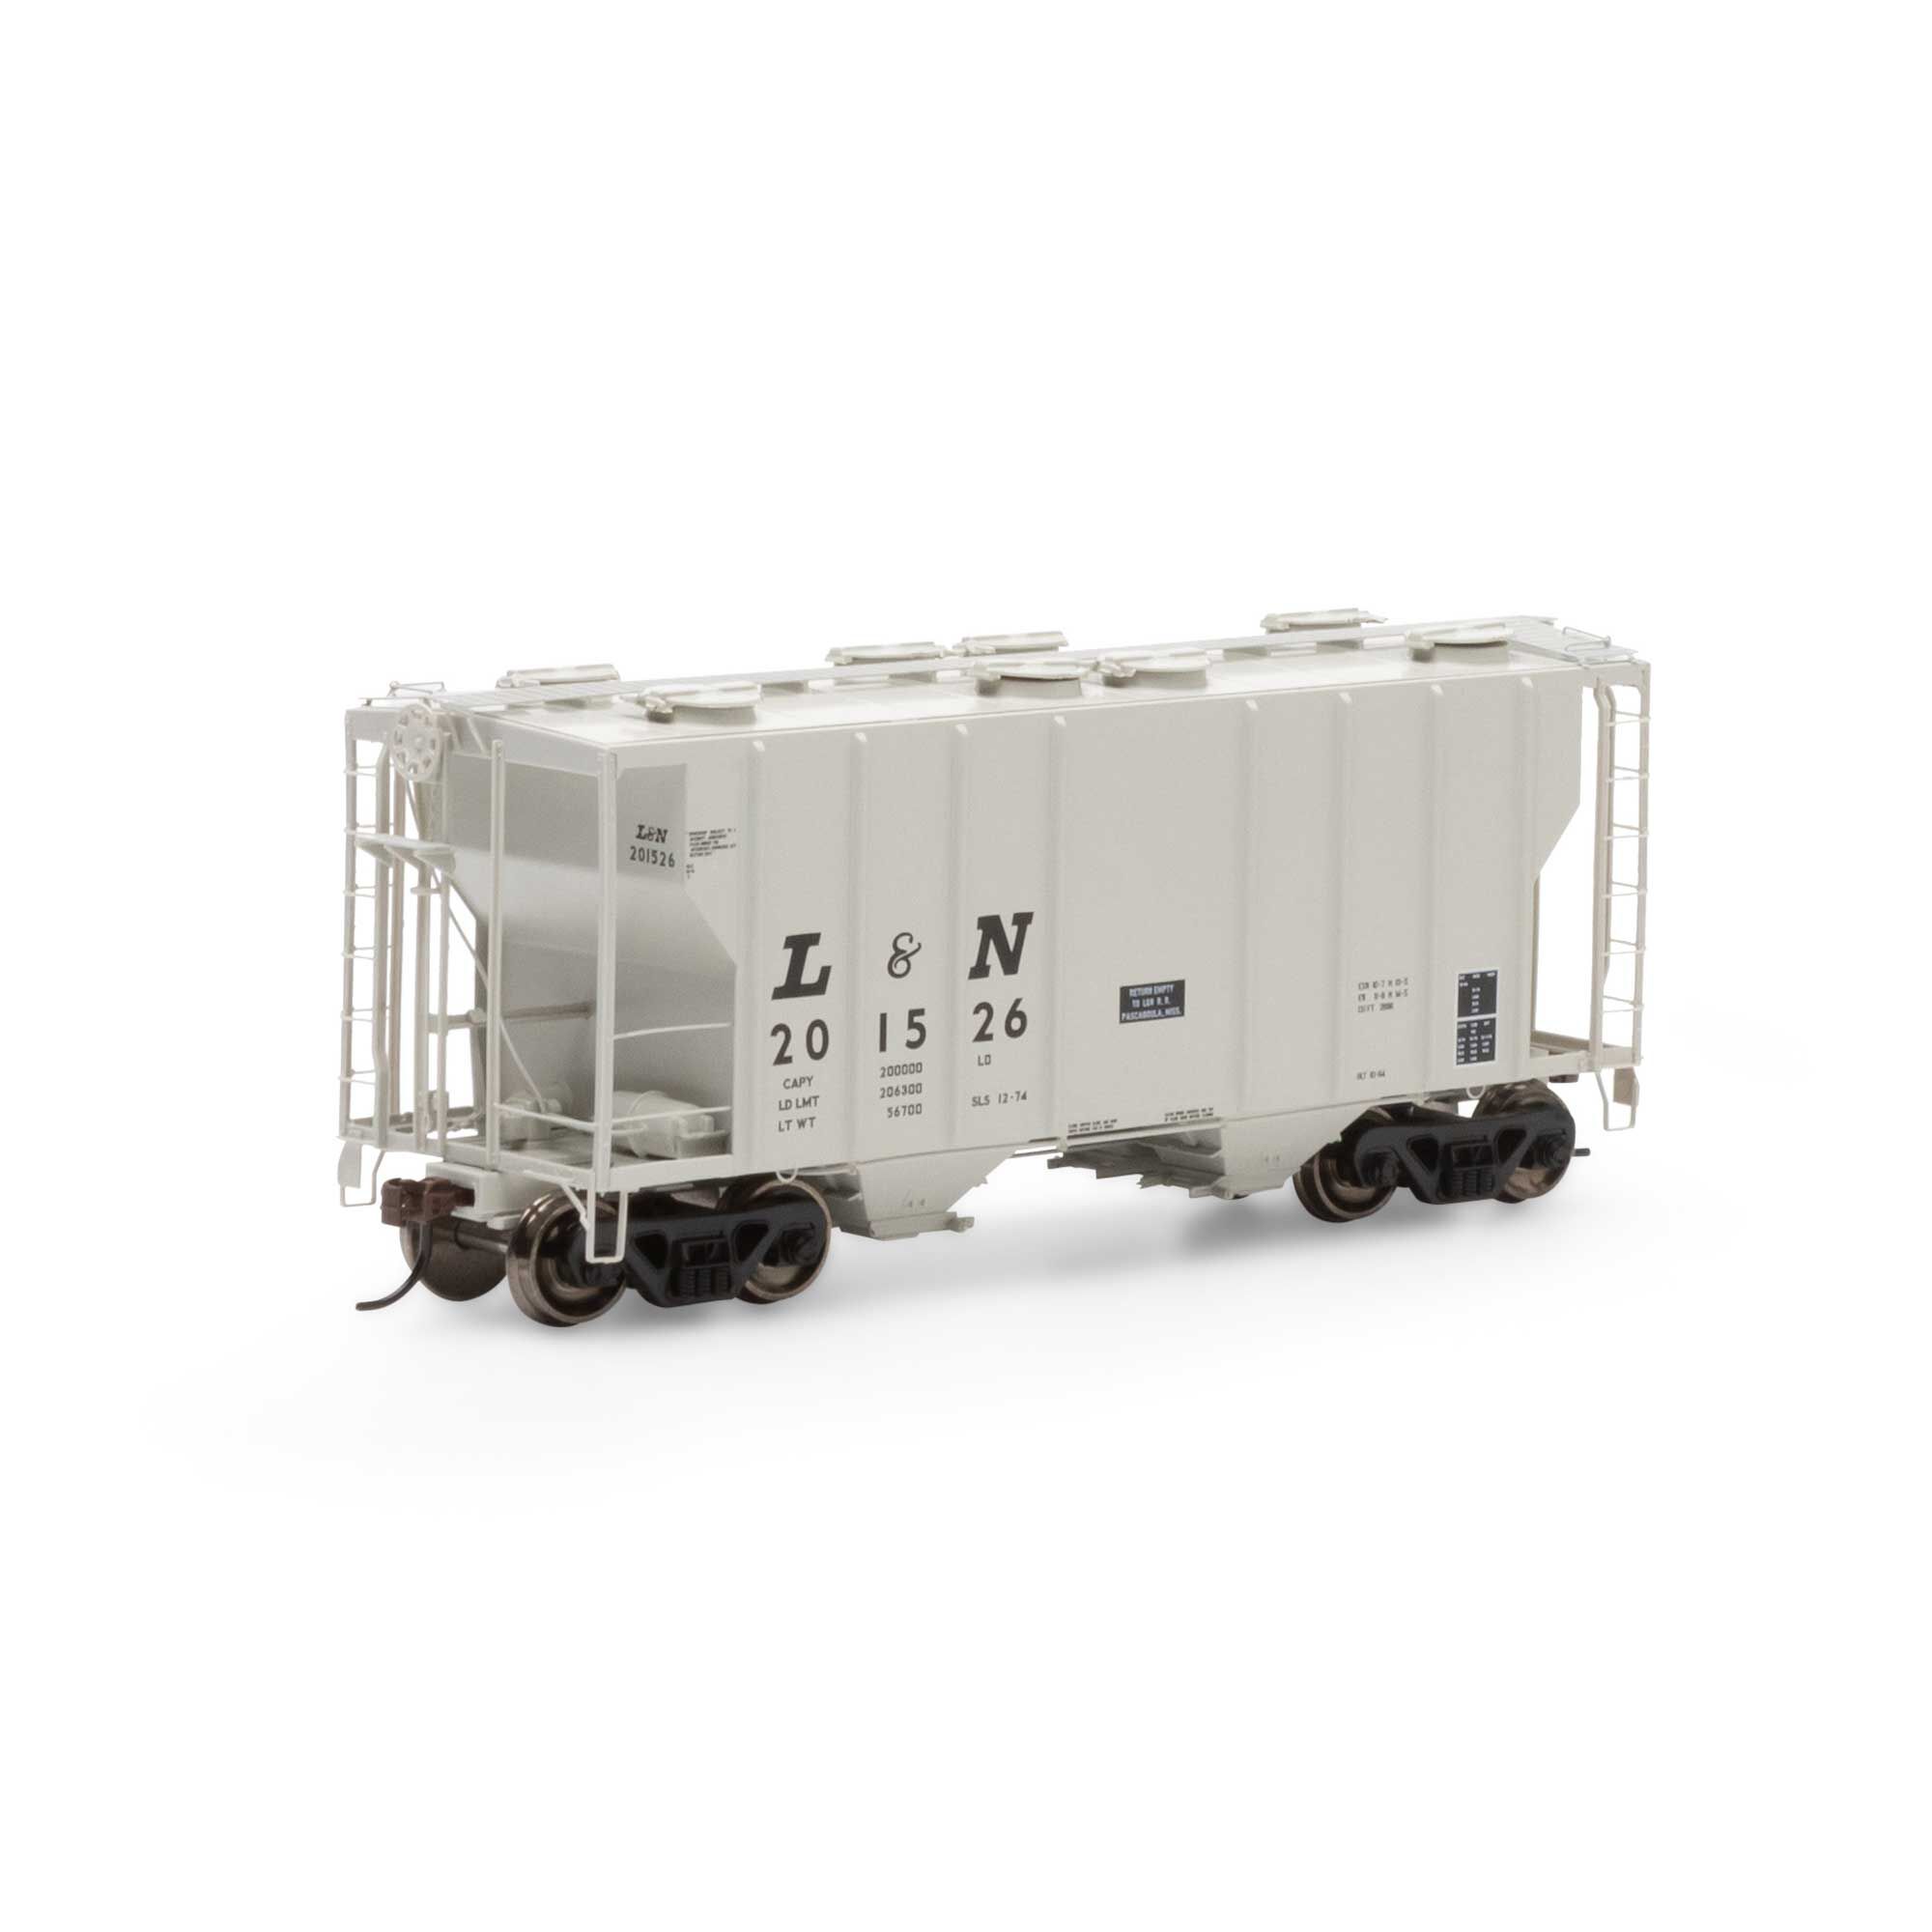 Athearn HO RTR PS-2 2600 Covered Hopper MKT #1307 ATH63762